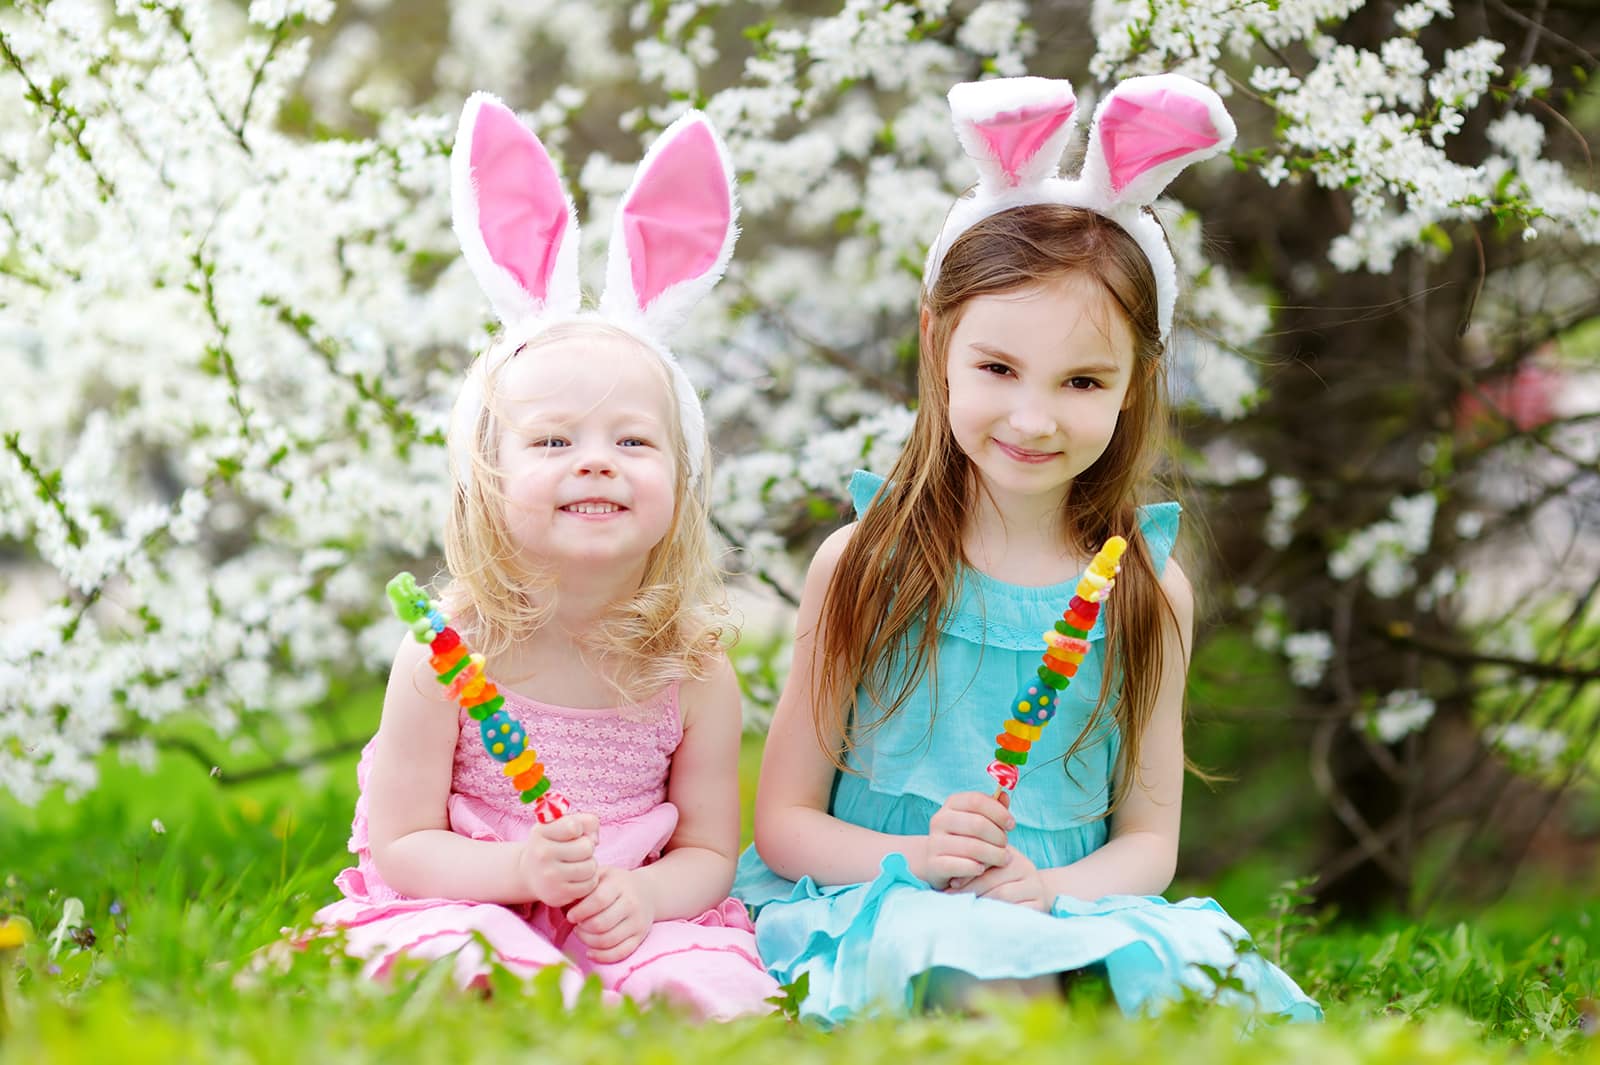 Ask Your Edna Dentist: How to Choose Easter Candy for Better Dental Health